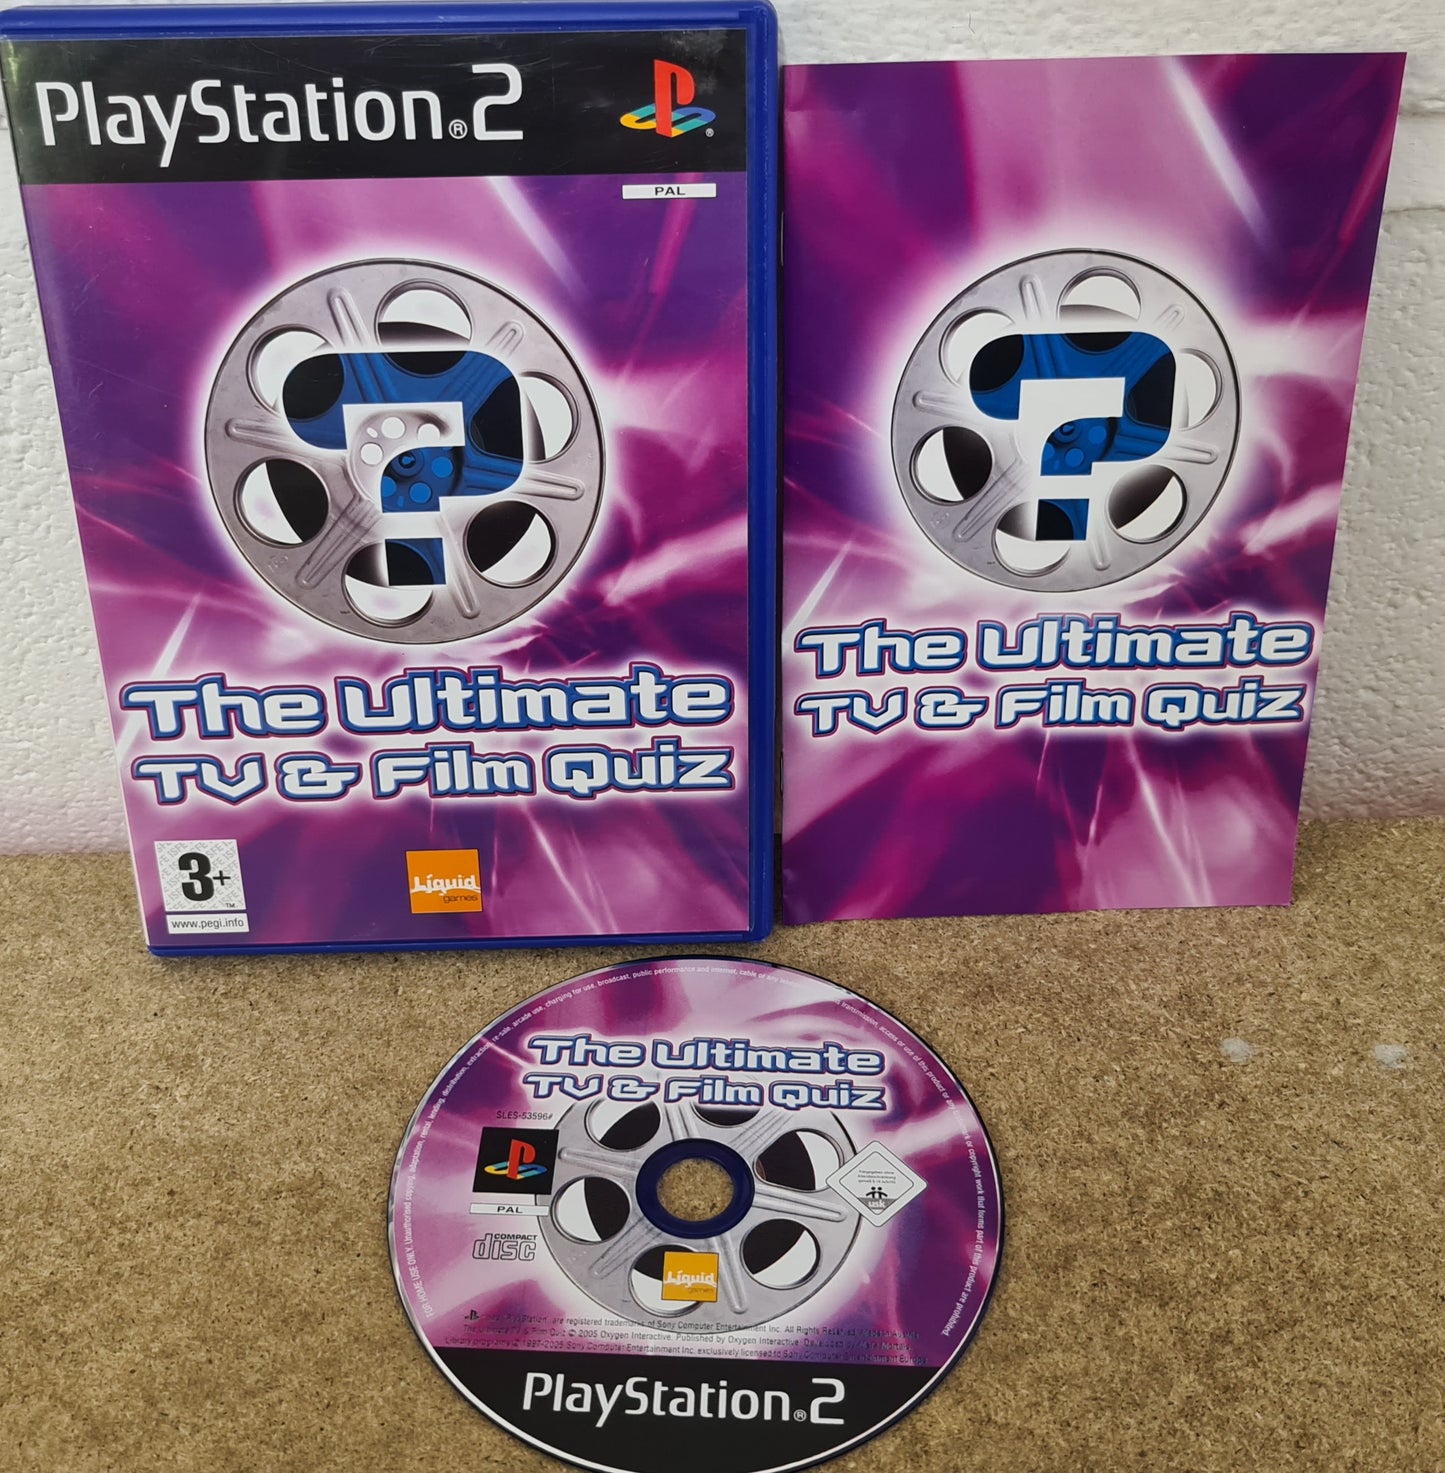 The Ultimate TV & Film Quiz Sony Playstation 2 (PS2) Game